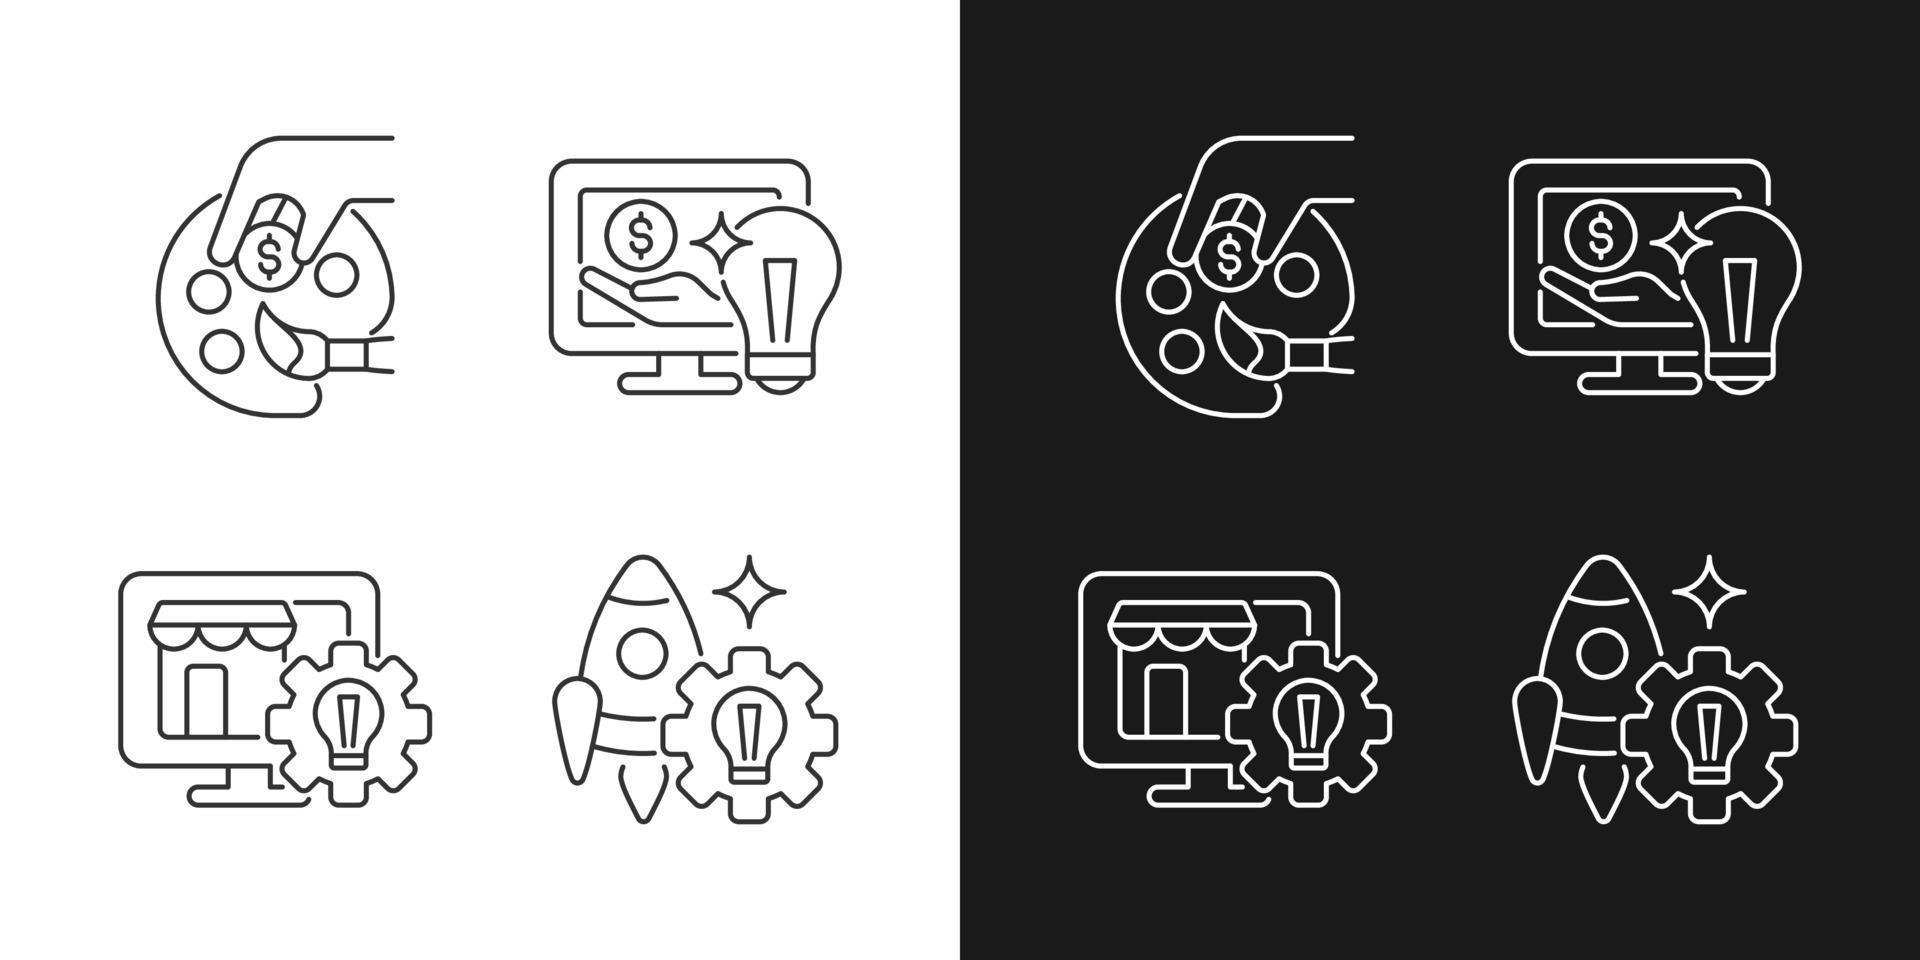 Startup ideas linear icons set for dark and light mode. Patronage, guidance. Online marketplace. Small business. Customizable thin line symbols. Isolated vector outline illustrations. Editable stroke